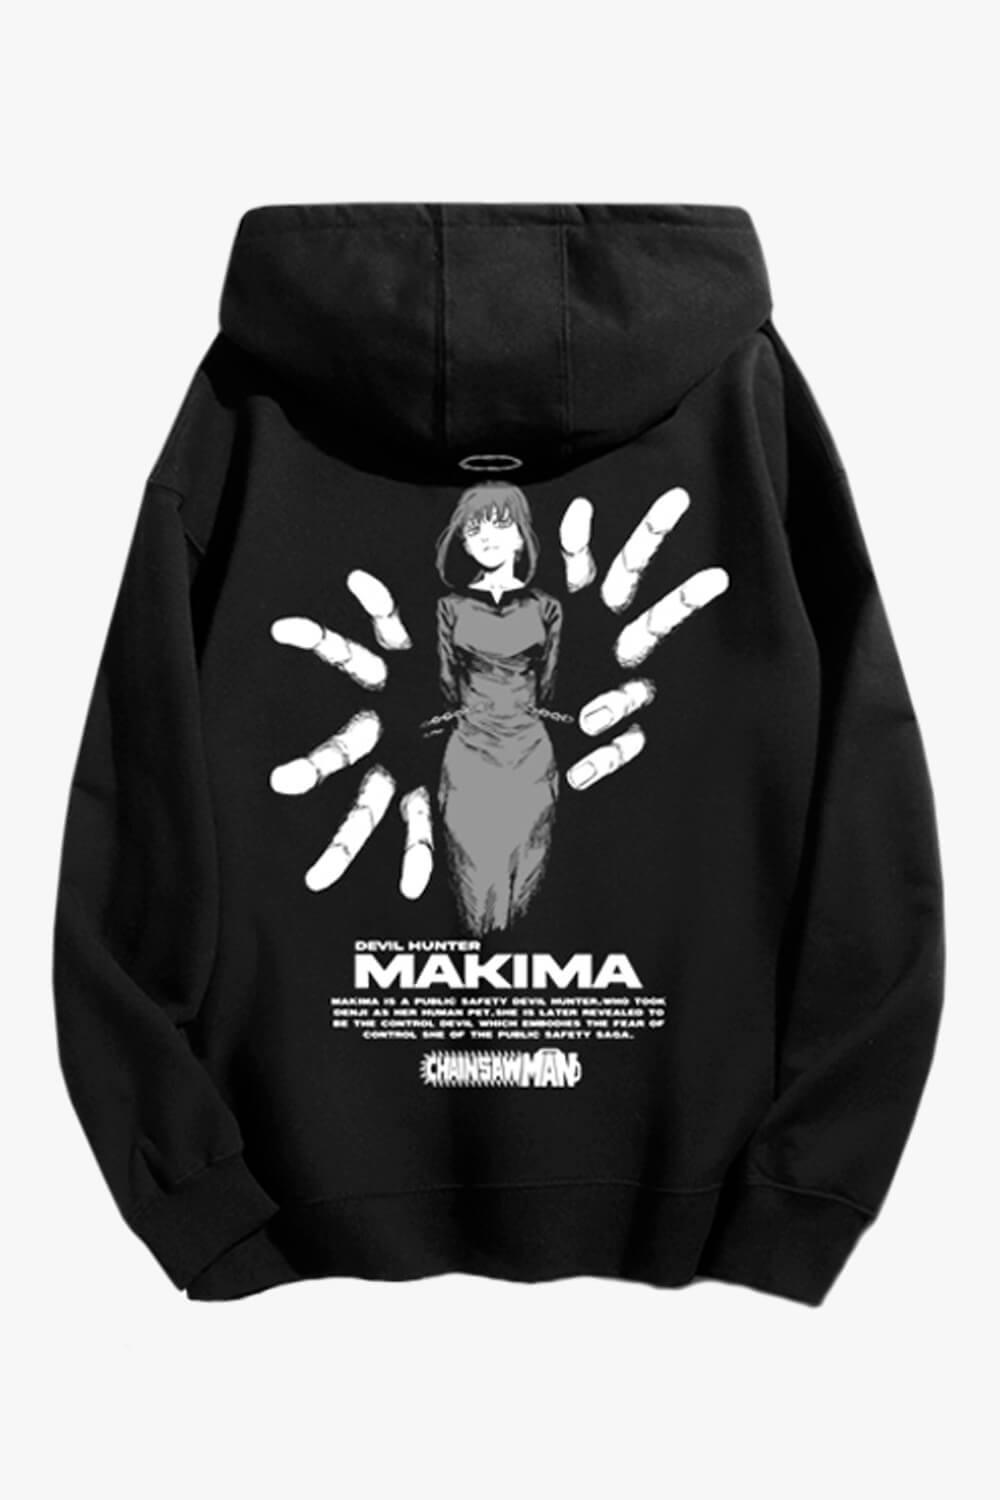 Chainsaw Man Makima Hands Aesthetic Hoodie - Aesthetic Clothes Shop